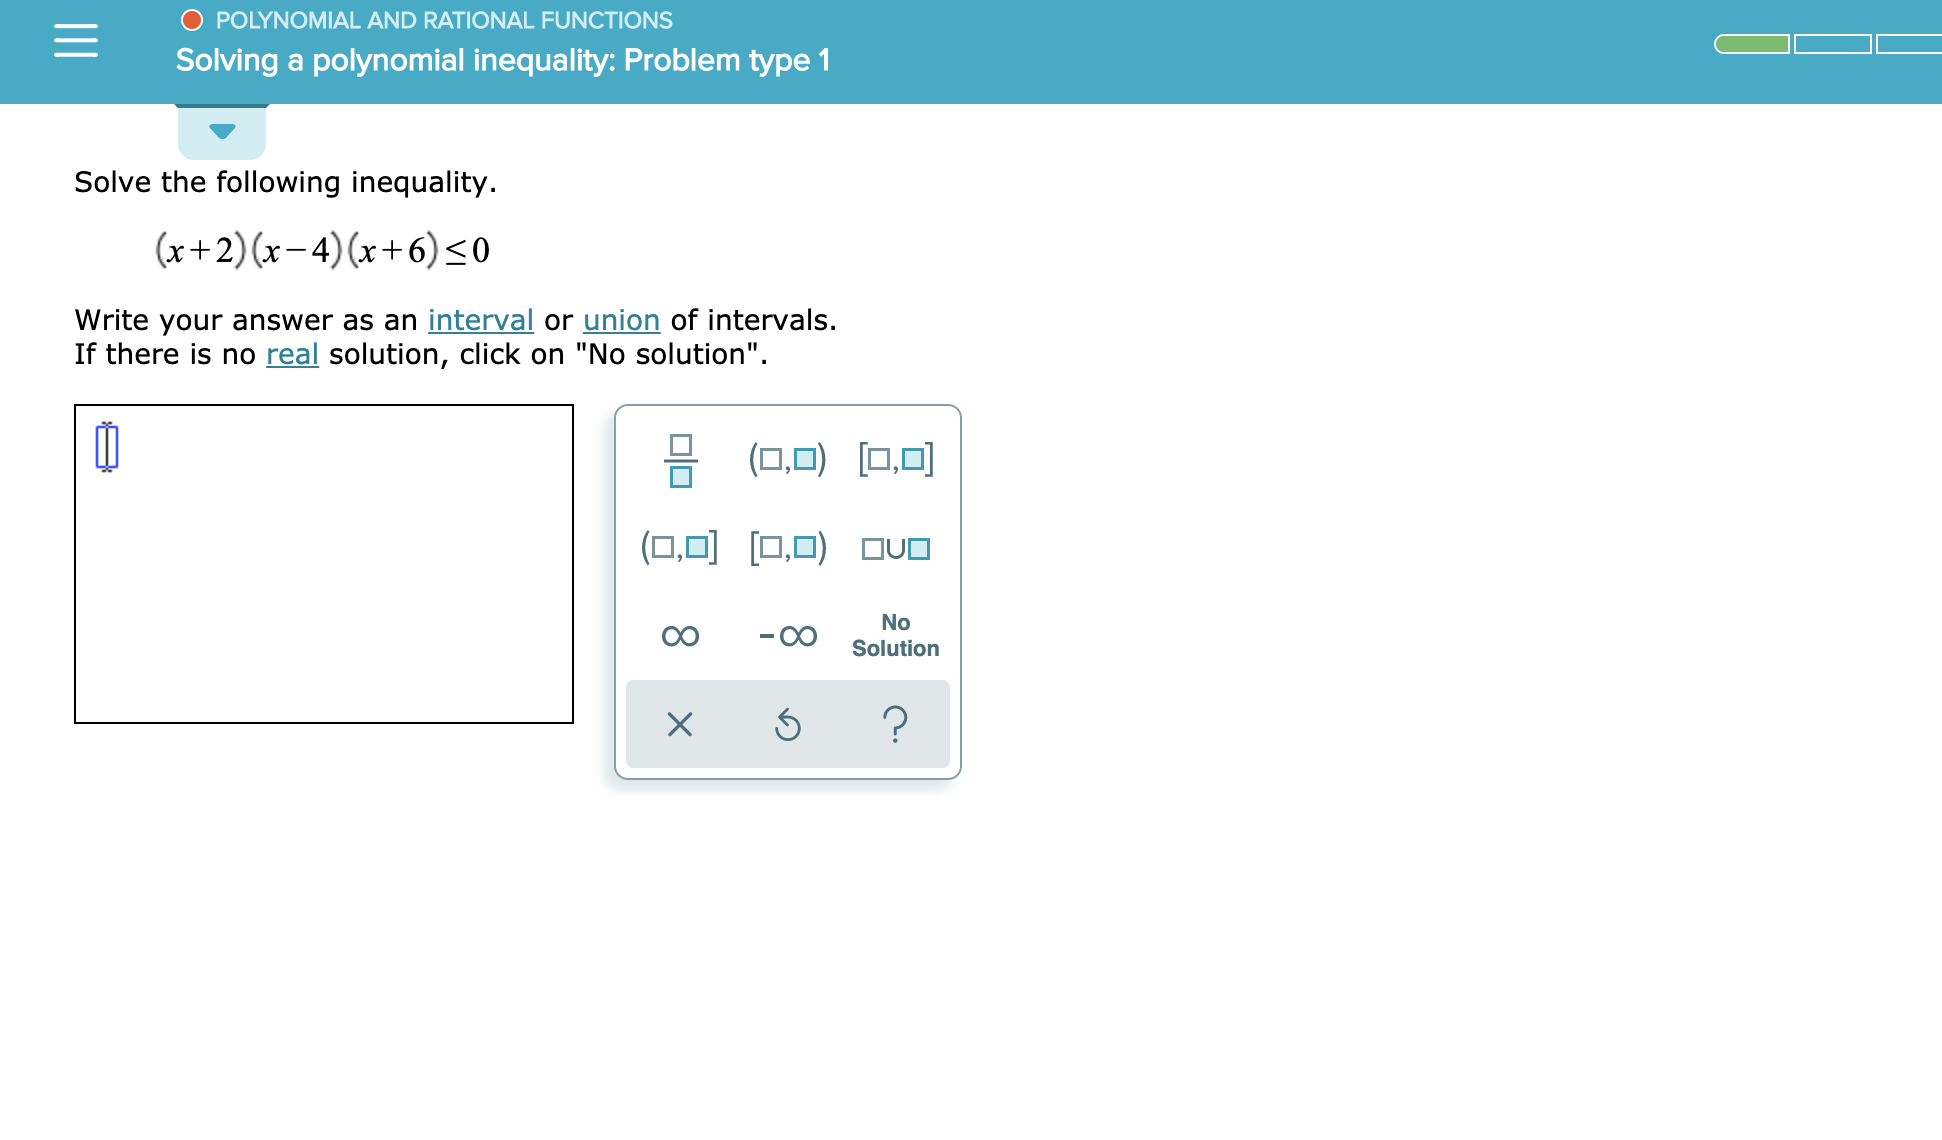 O POLYNOMIAL AND RATIONAL FUNCTIONS
Solving a polynomial inequality: Problem type 1
Solve the following inequality.
(x+2) (x-4)x+6)0
Write your answer as an interval or union of intervals.
If there is no real solution, click on "No solution"
(□,미) [□,미
미□
No
Solution
?
